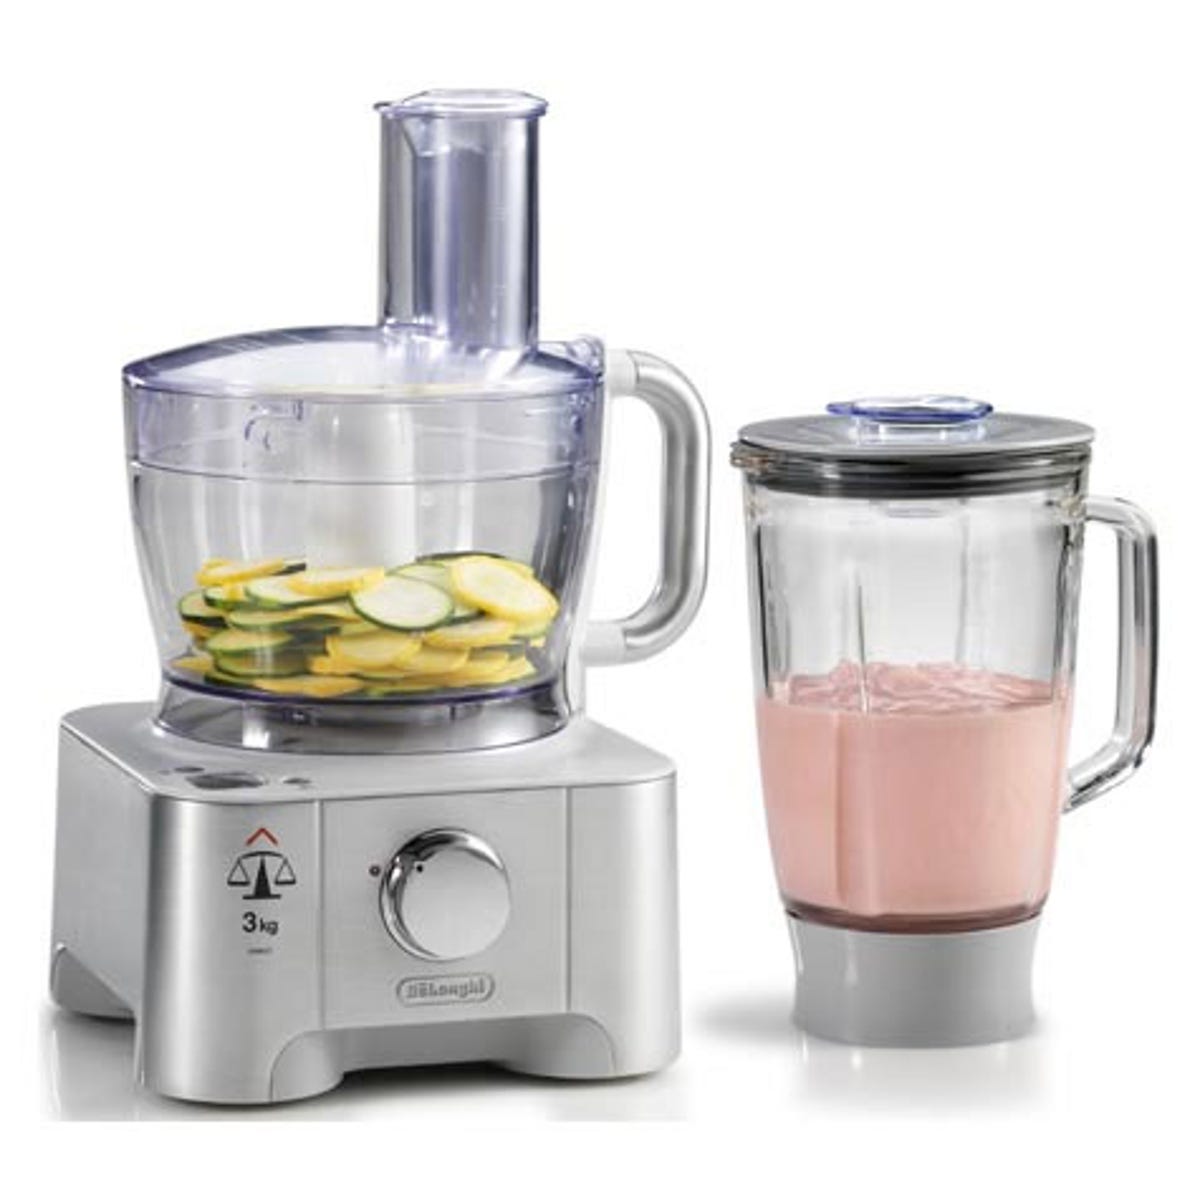 A scale, a food processor and a blender all in one.